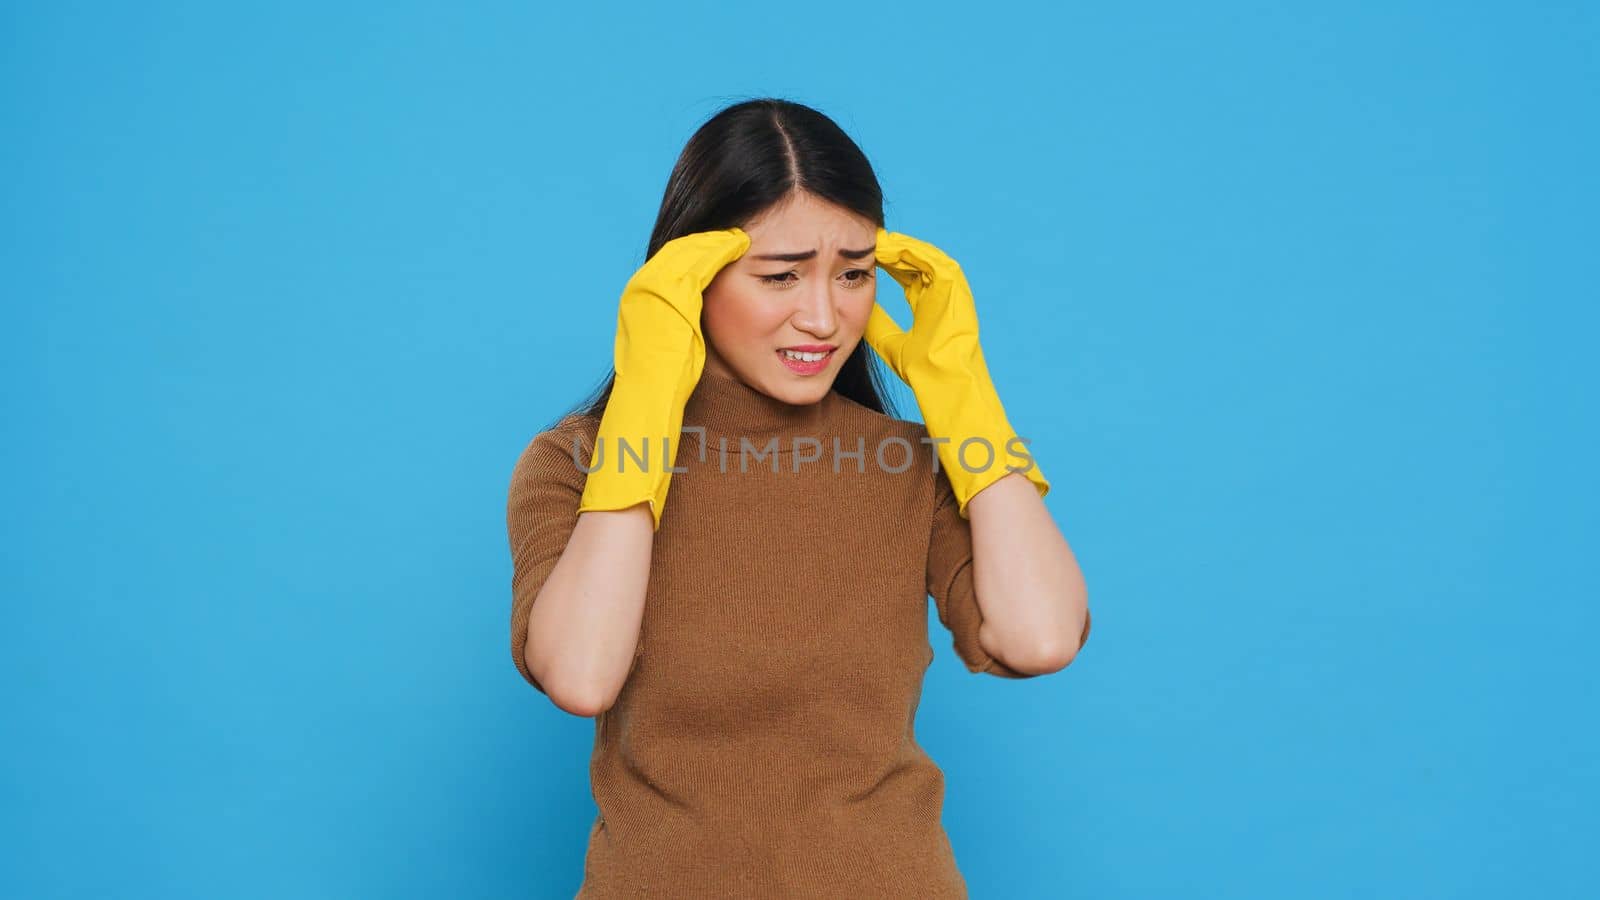 Overwhelmed housekeeper being tired after cleaning all house using variety of chemical detergents, standing in studio over blue background. Housewives relied on the cleaning lady services